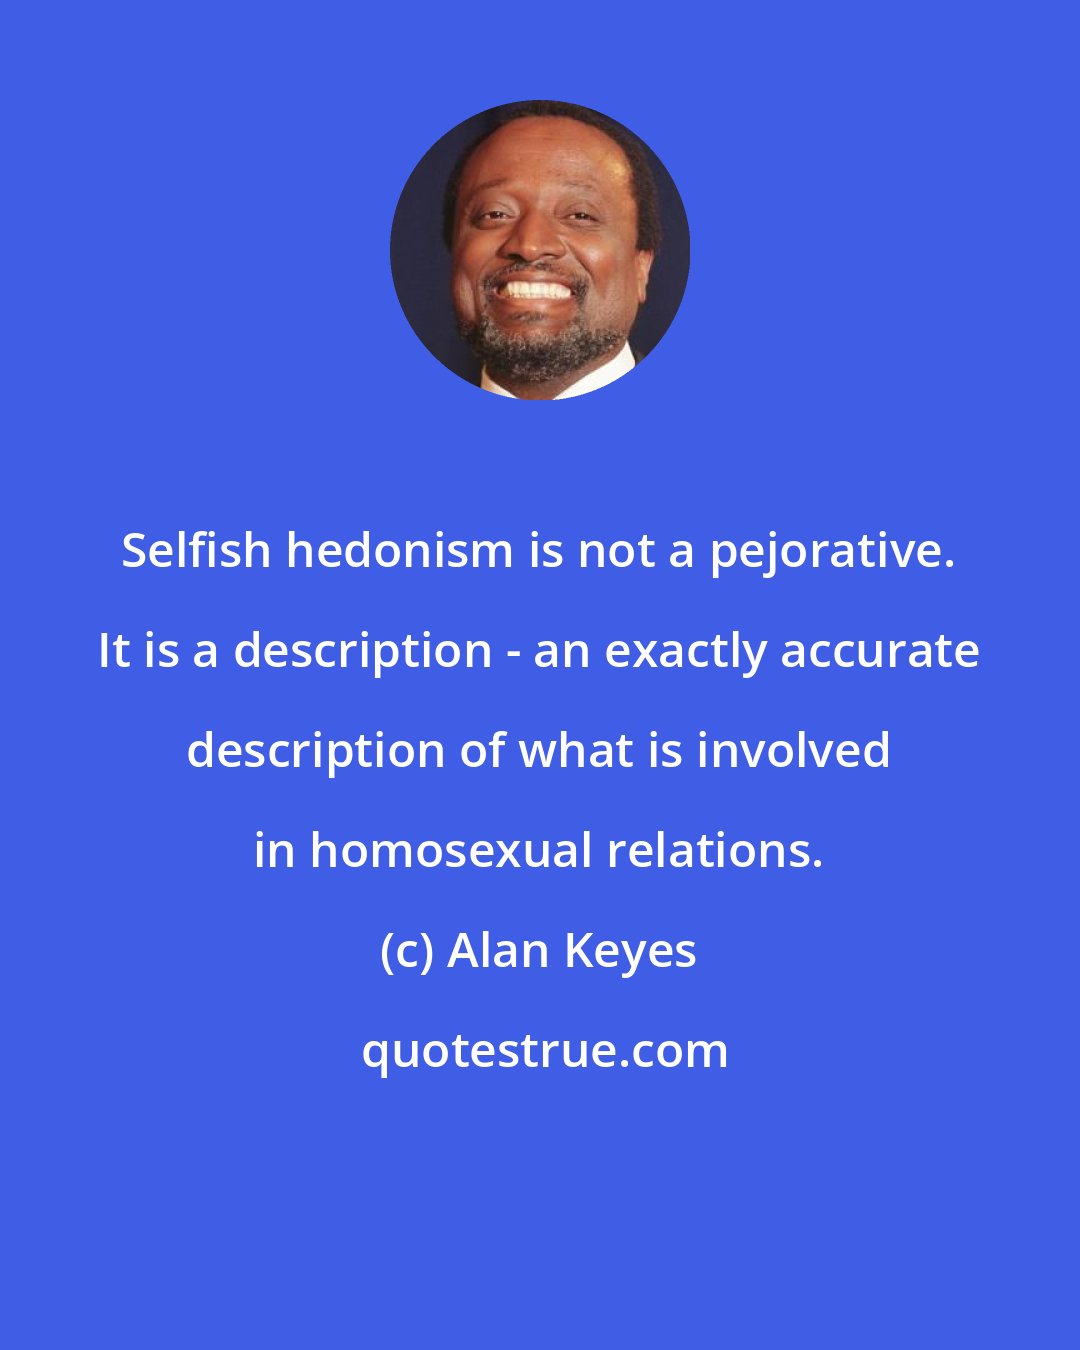 Alan Keyes: Selfish hedonism is not a pejorative. It is a description - an exactly accurate description of what is involved in homosexual relations.